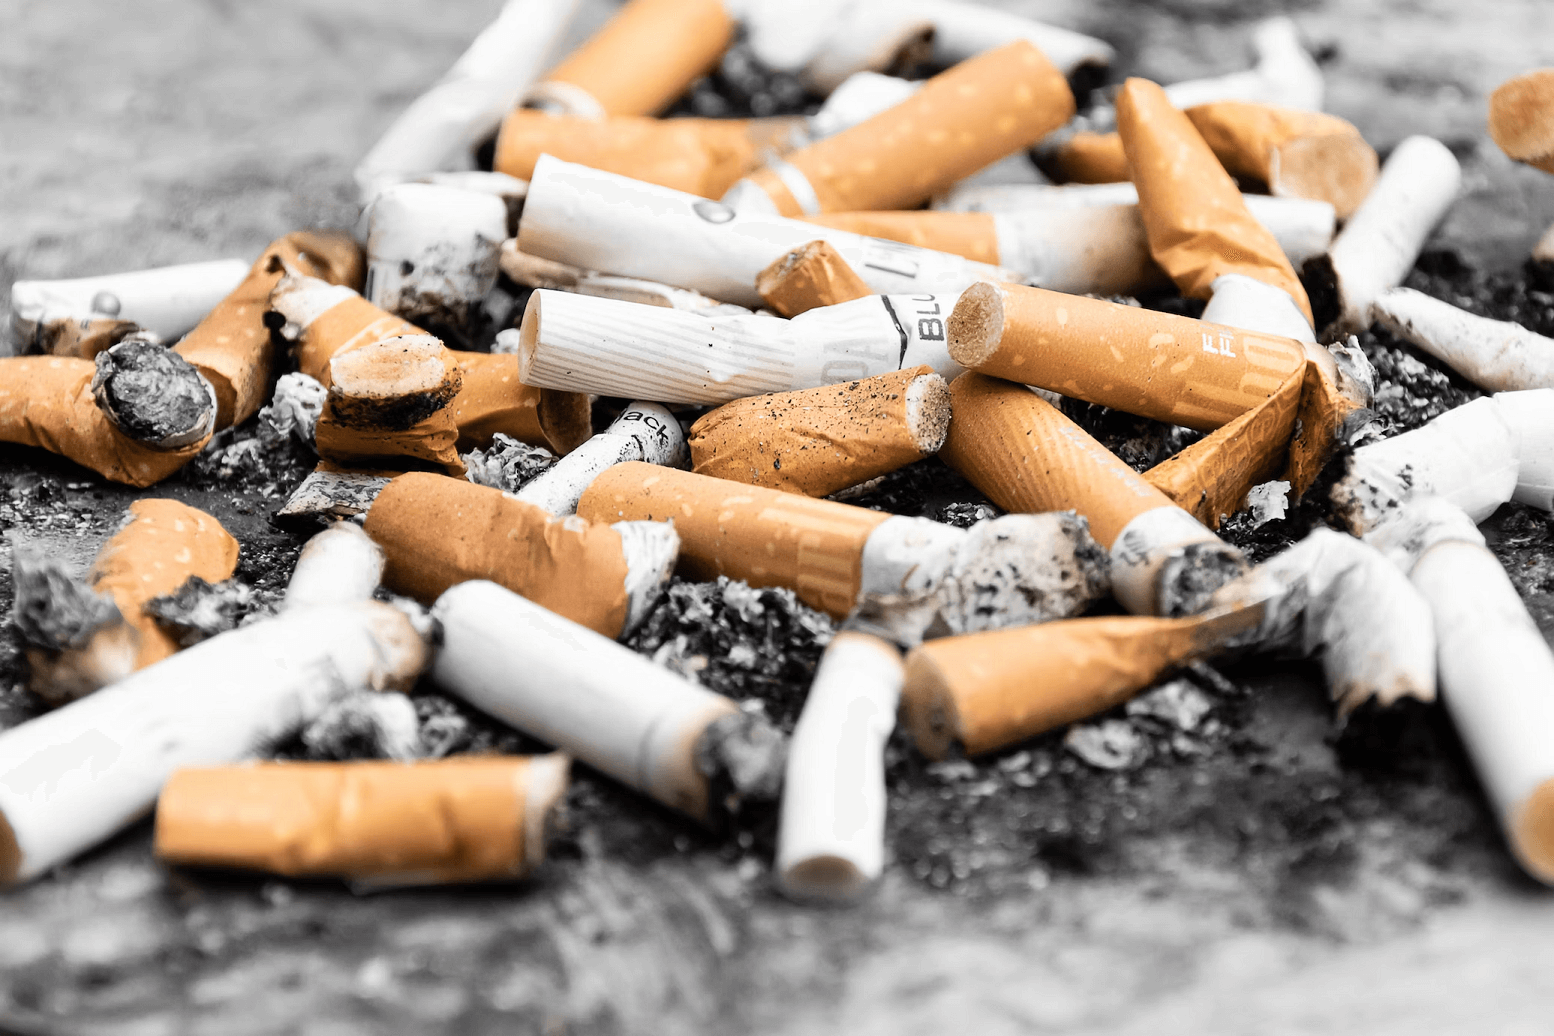 A pile of extinguished cigarette butts laying on the ground